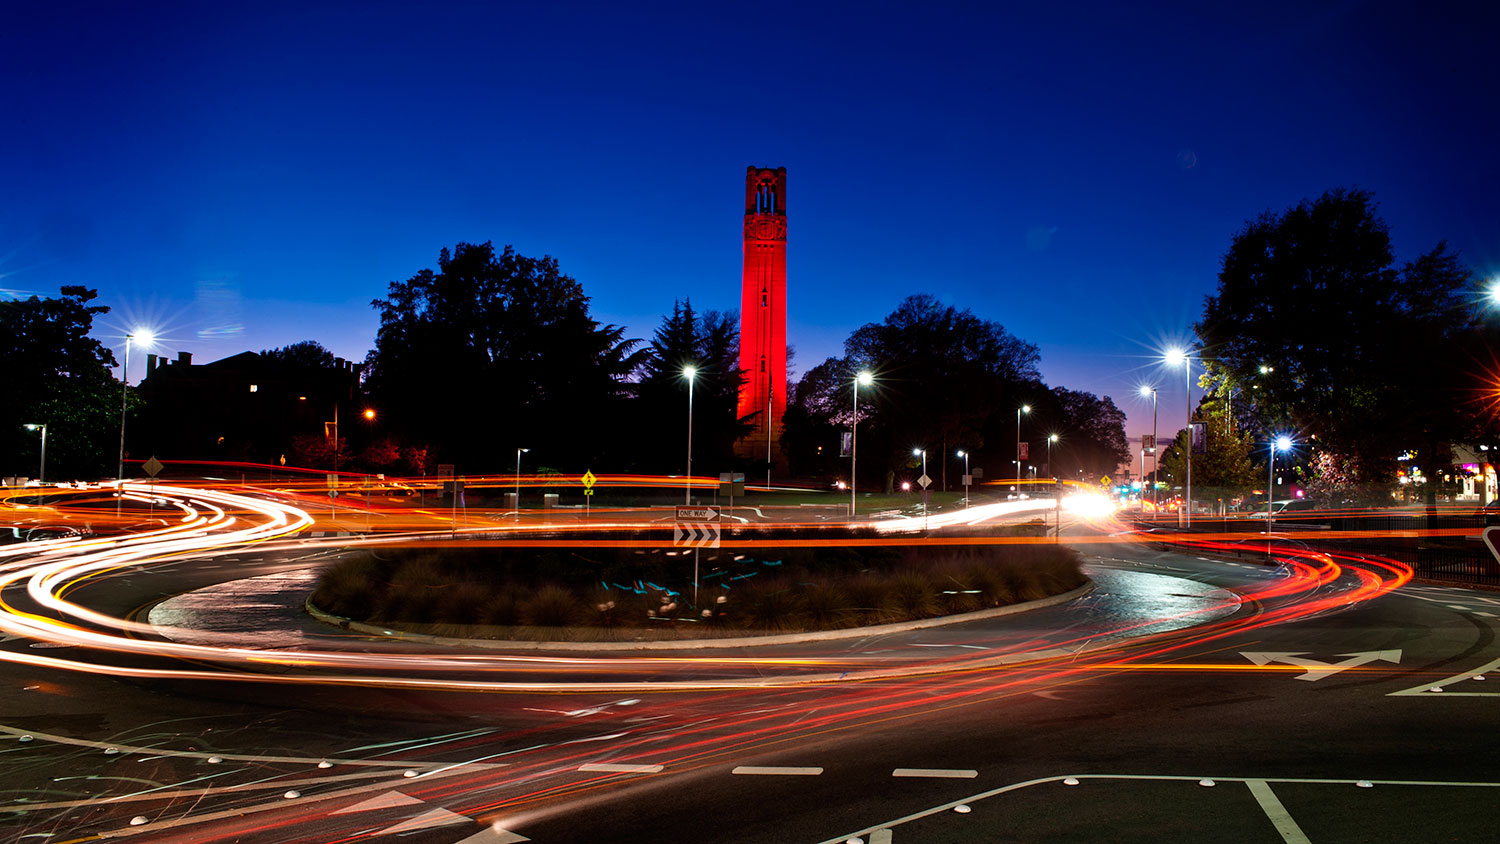 Lights spin around the Memorial Belltower, lit red to celebrate an athletic or academic success.